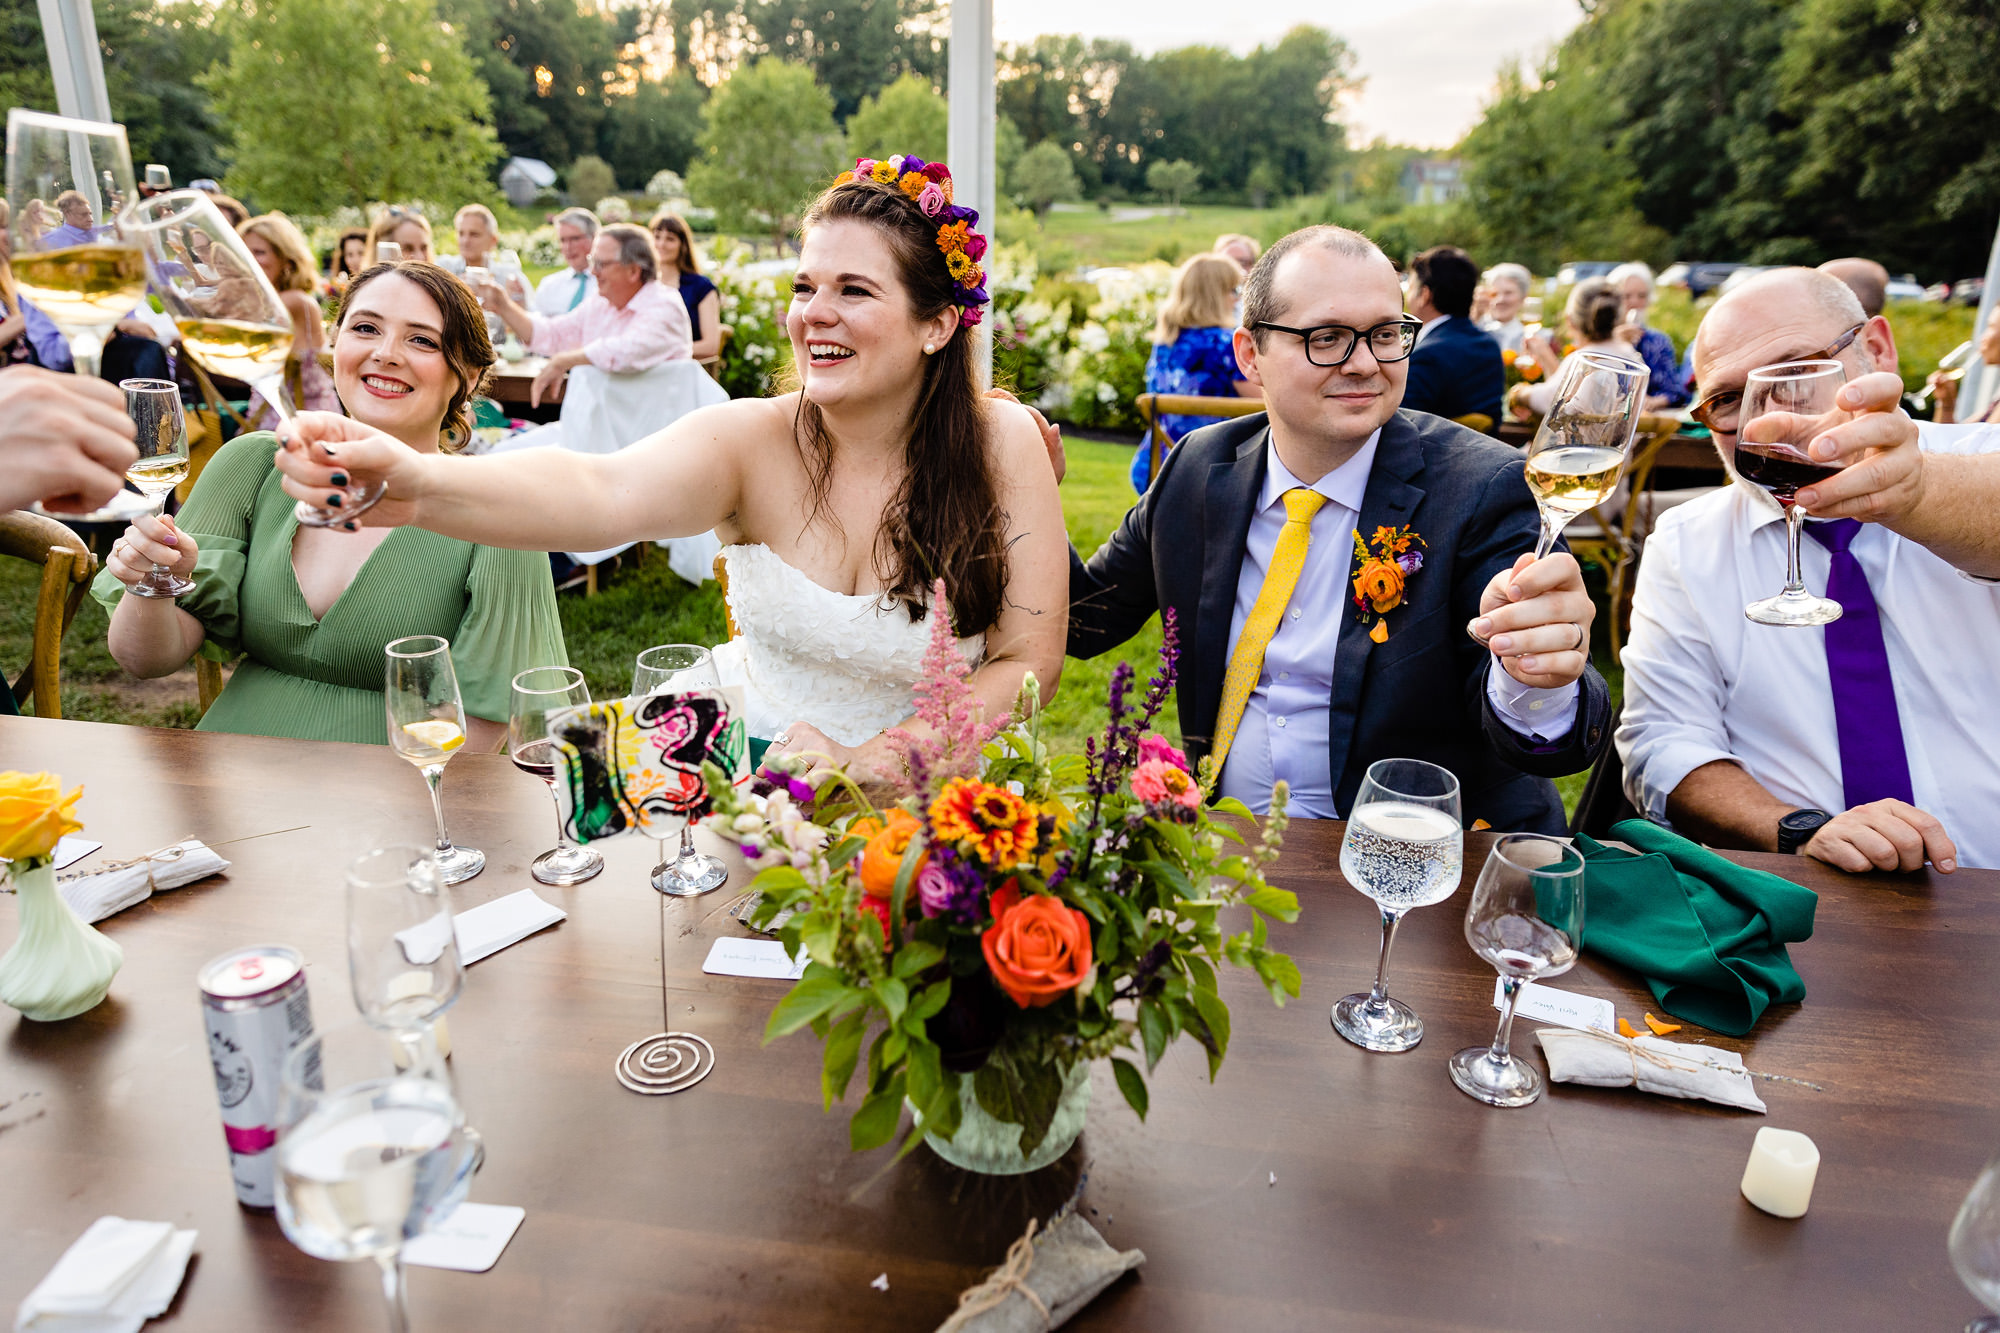 A wedding couple clink their glasses with their loved ones during toasts.